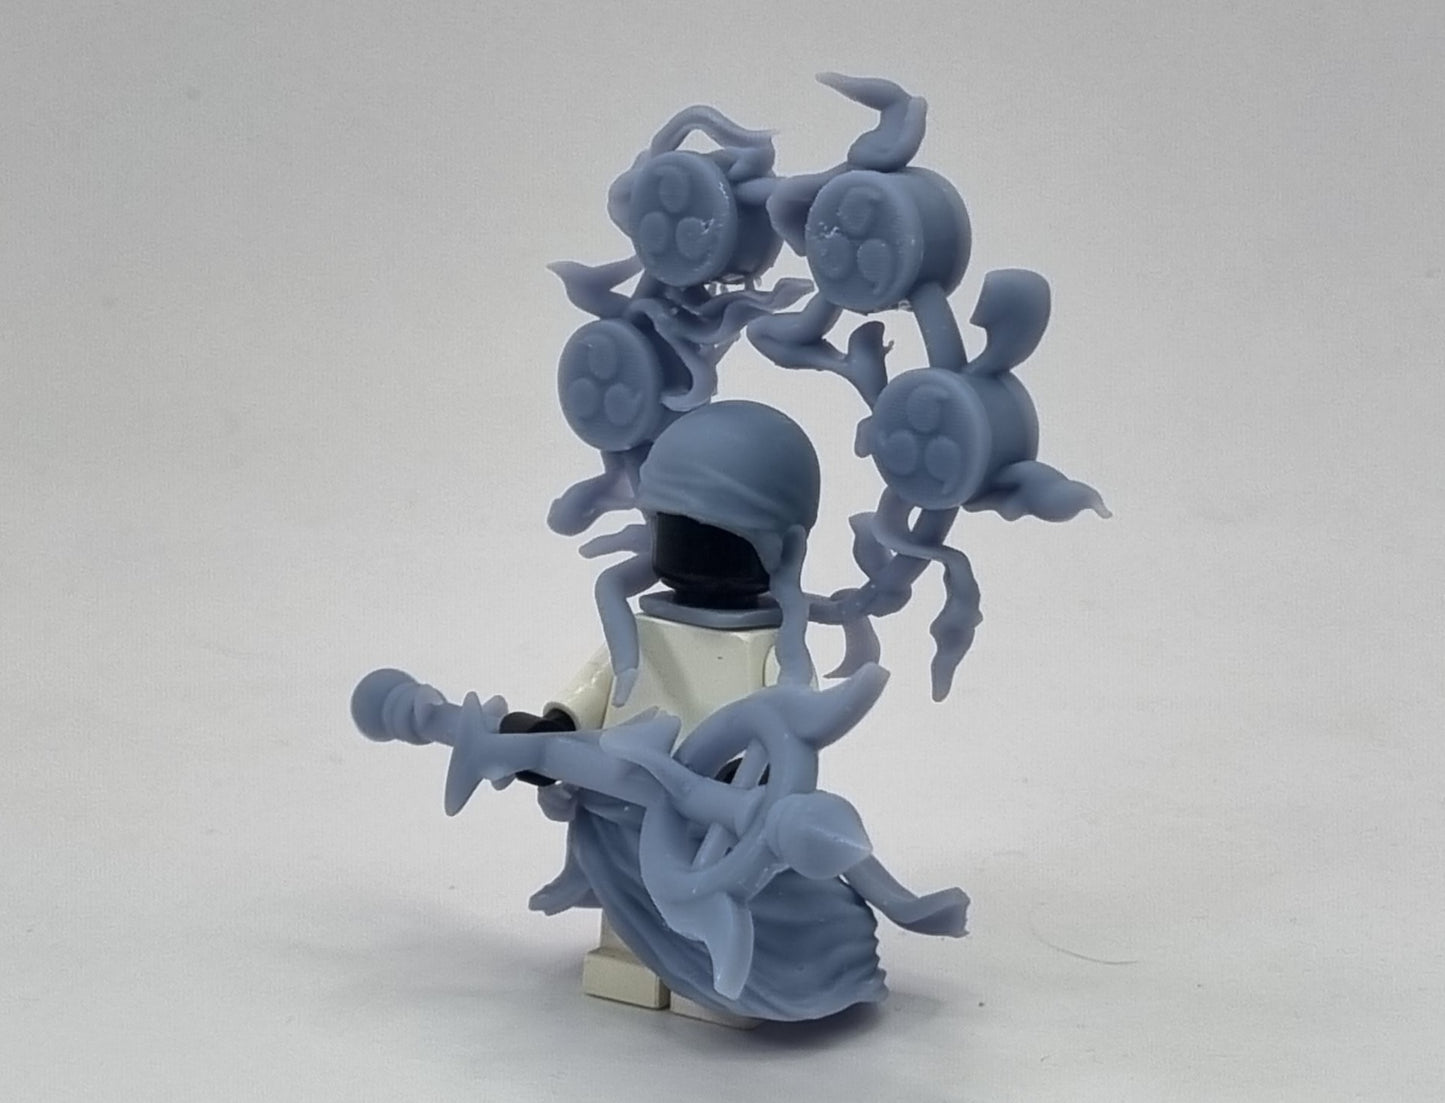 Building toy custom 3D printed pirate on a cloud with the power of thunder!